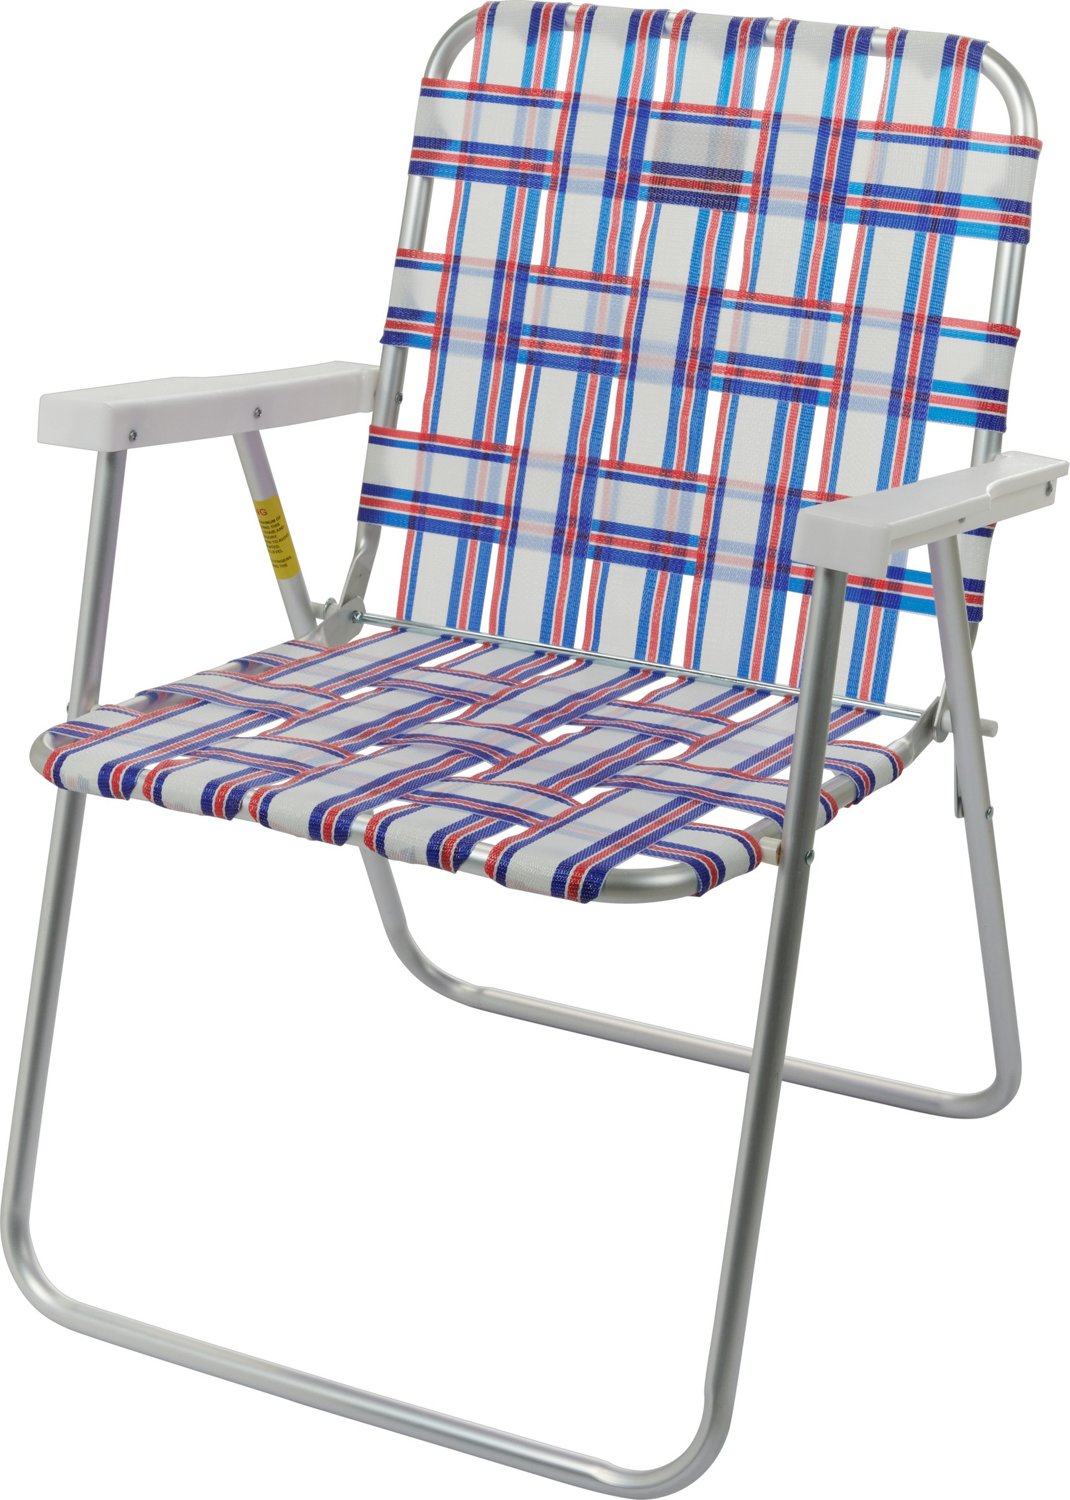 Academy Sports + Outdoors Retro Lawn Chair